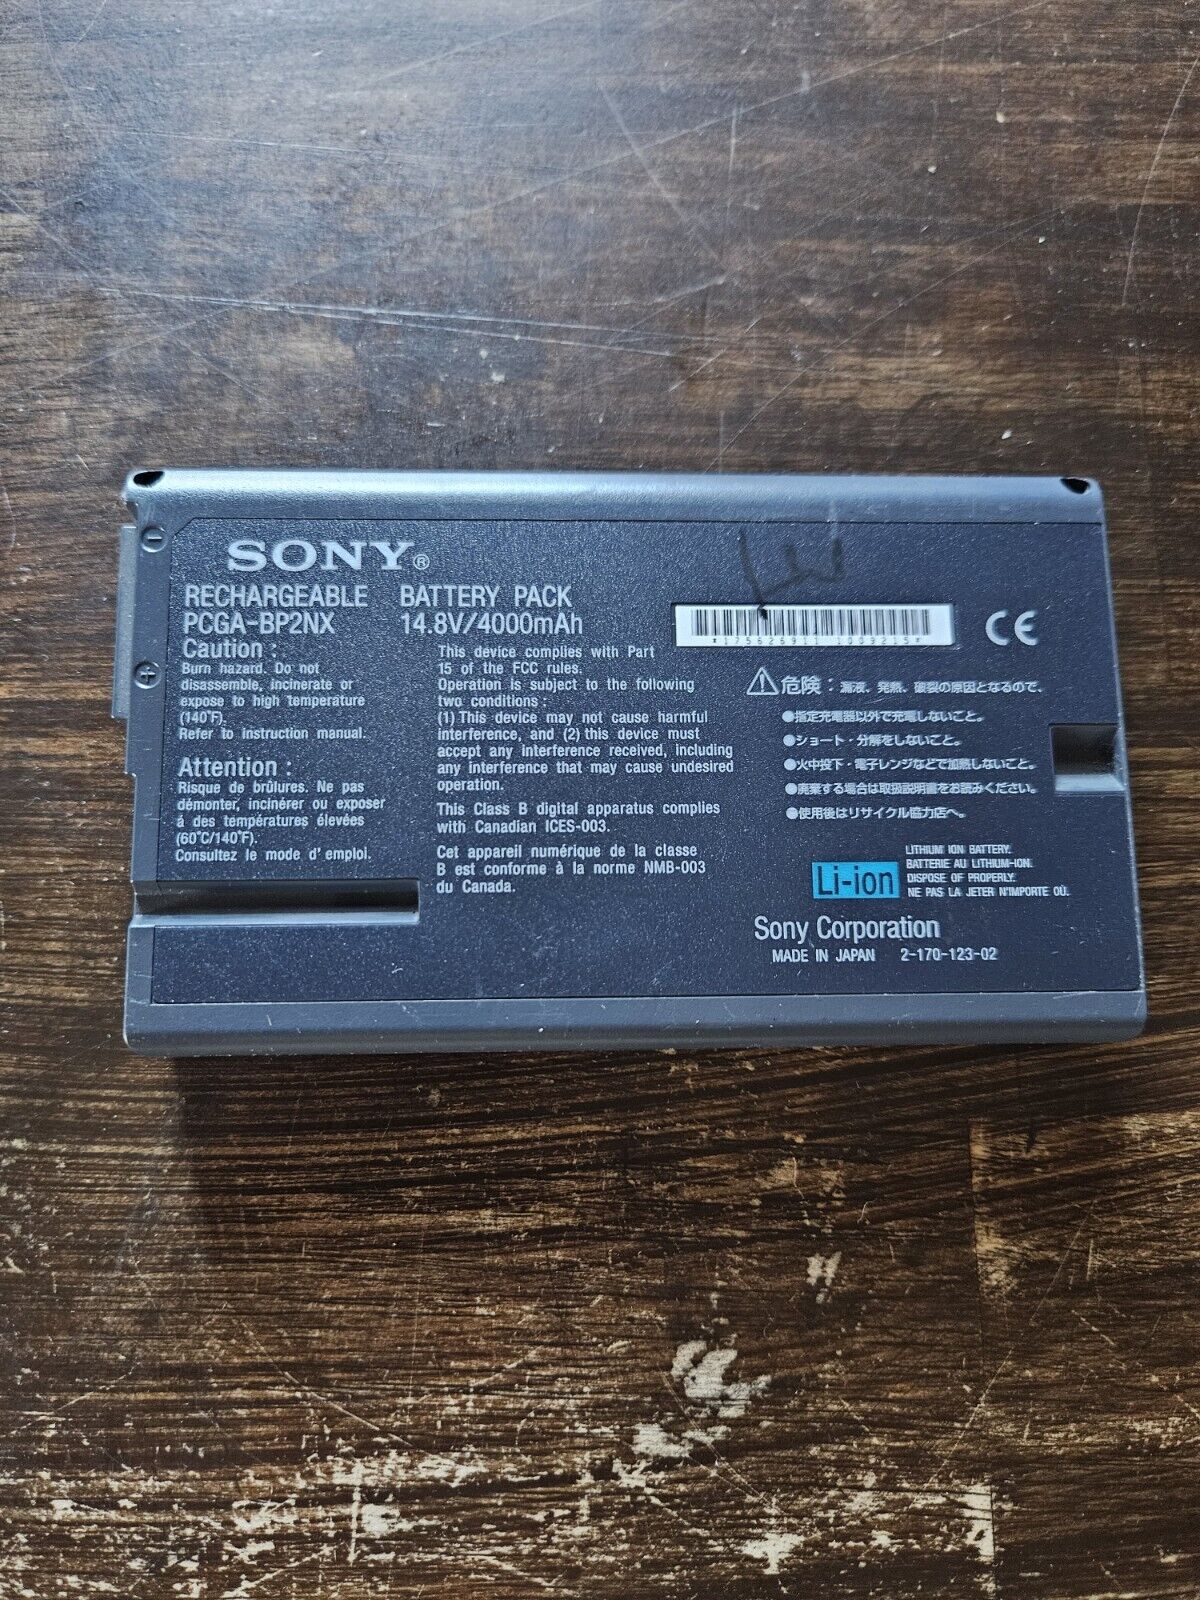 Sony Vaio Laptop Rechargeable Battery Pack PCGA-BP2NX Untested